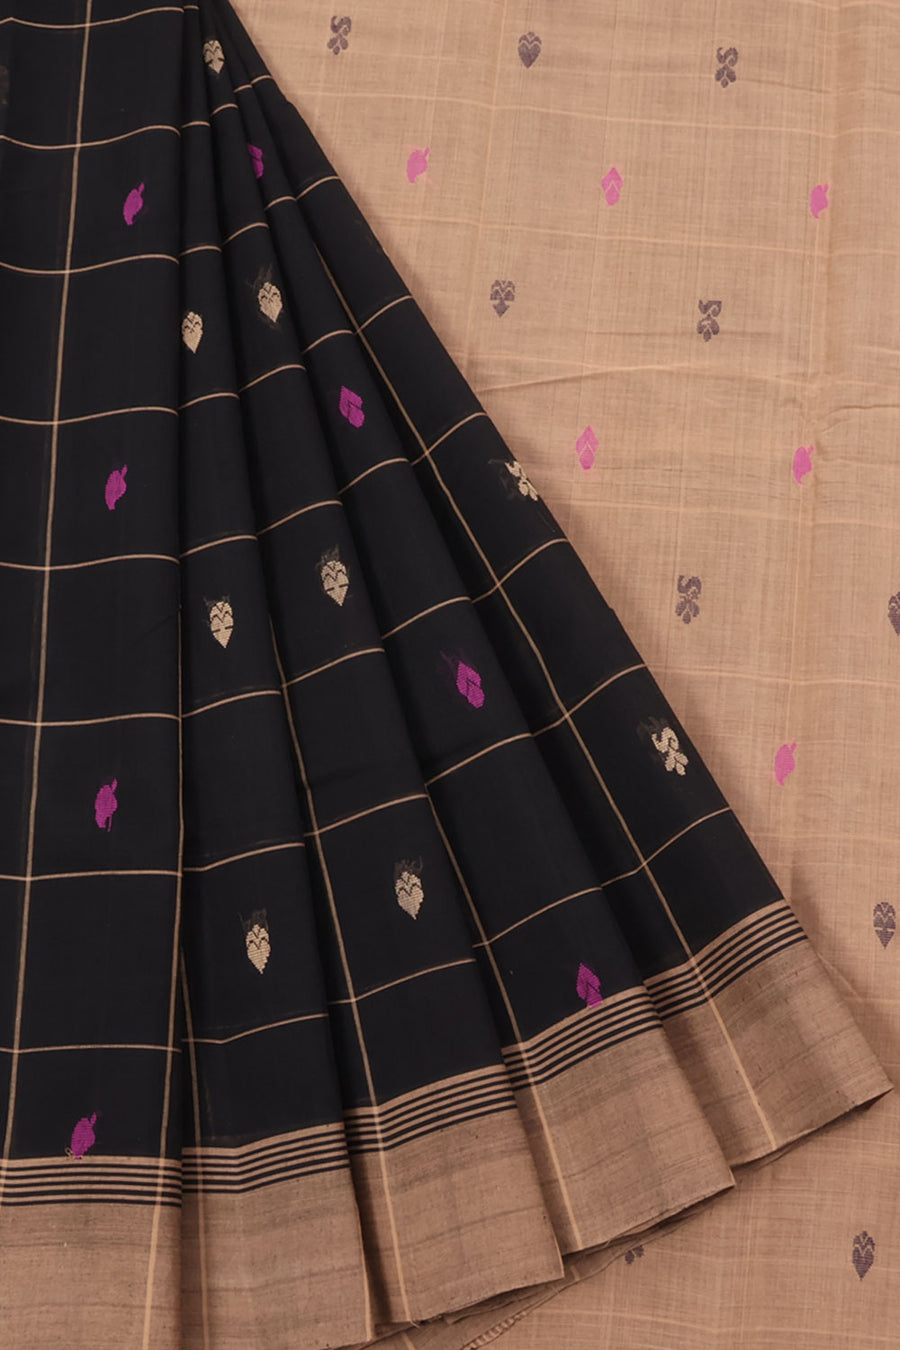 Handwoven Kanchi Cotton Saree with Checked Design, Stripes and Floral Motifs Pallu